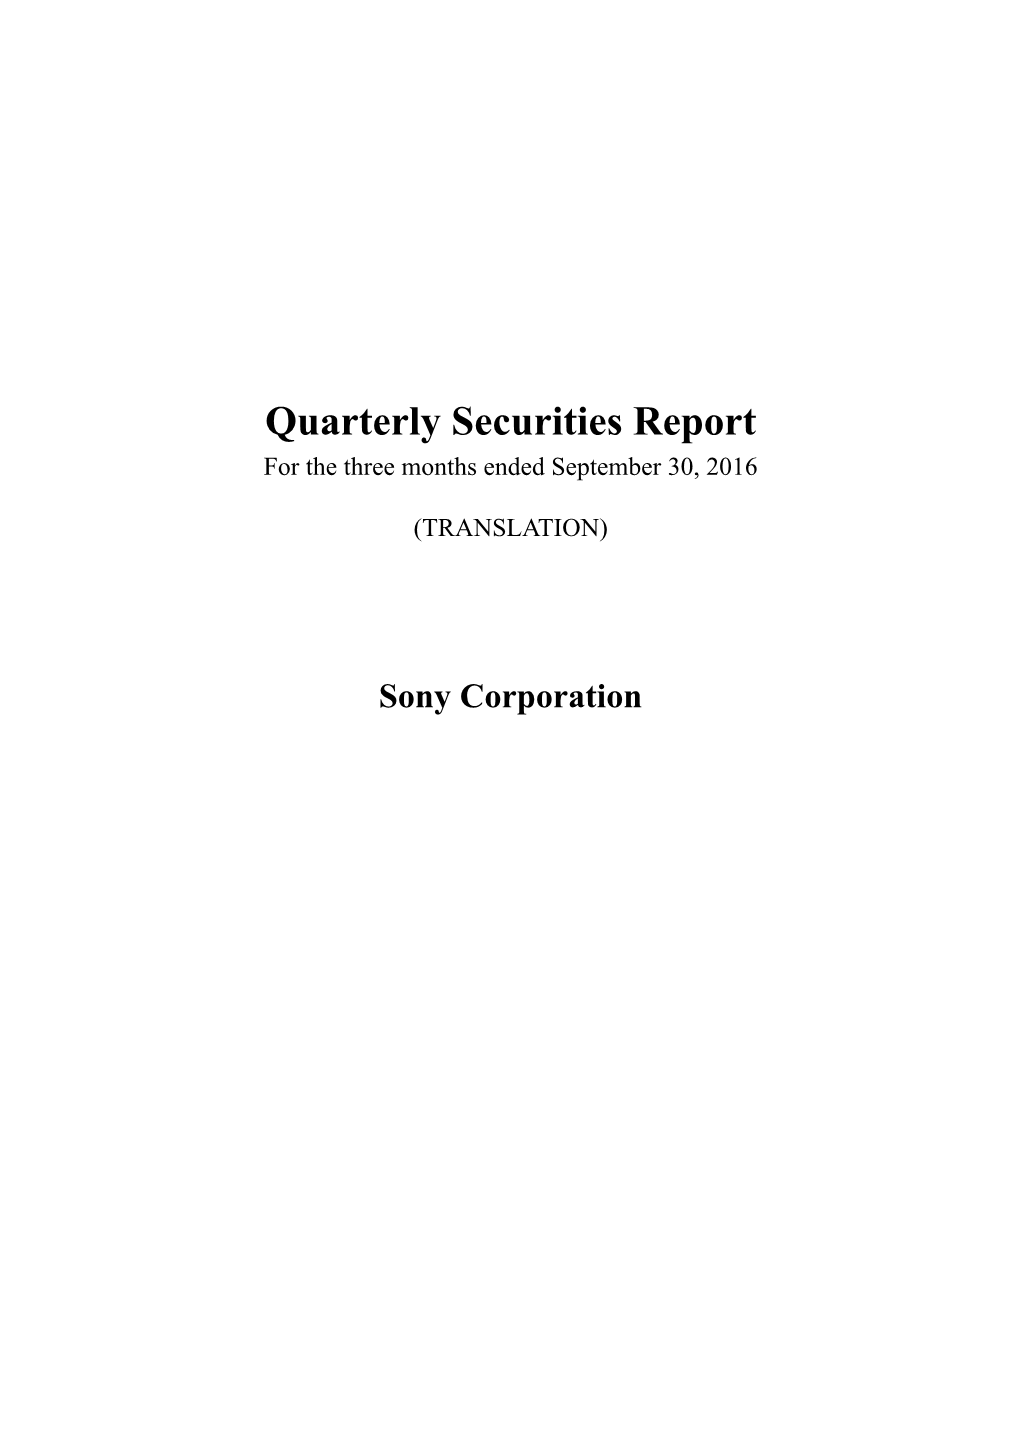 Quarterly Securities Report for the Three Months Ended September 30, 2016